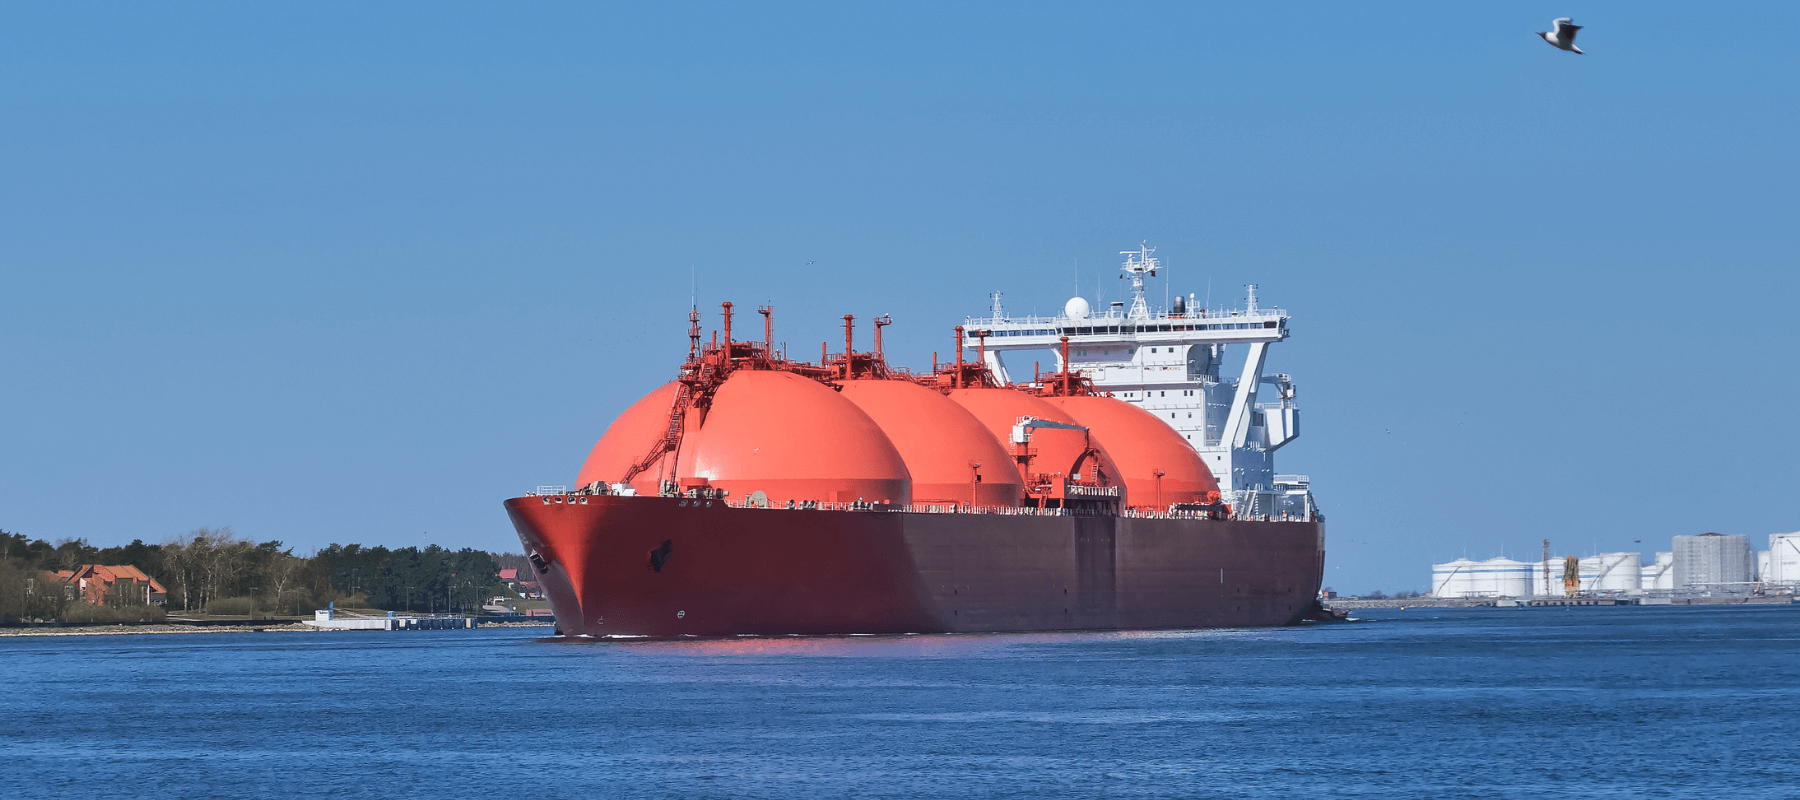 Some analysts see the size of the global LNG carrier fleet exceeding 1,000 vessels by 2026.